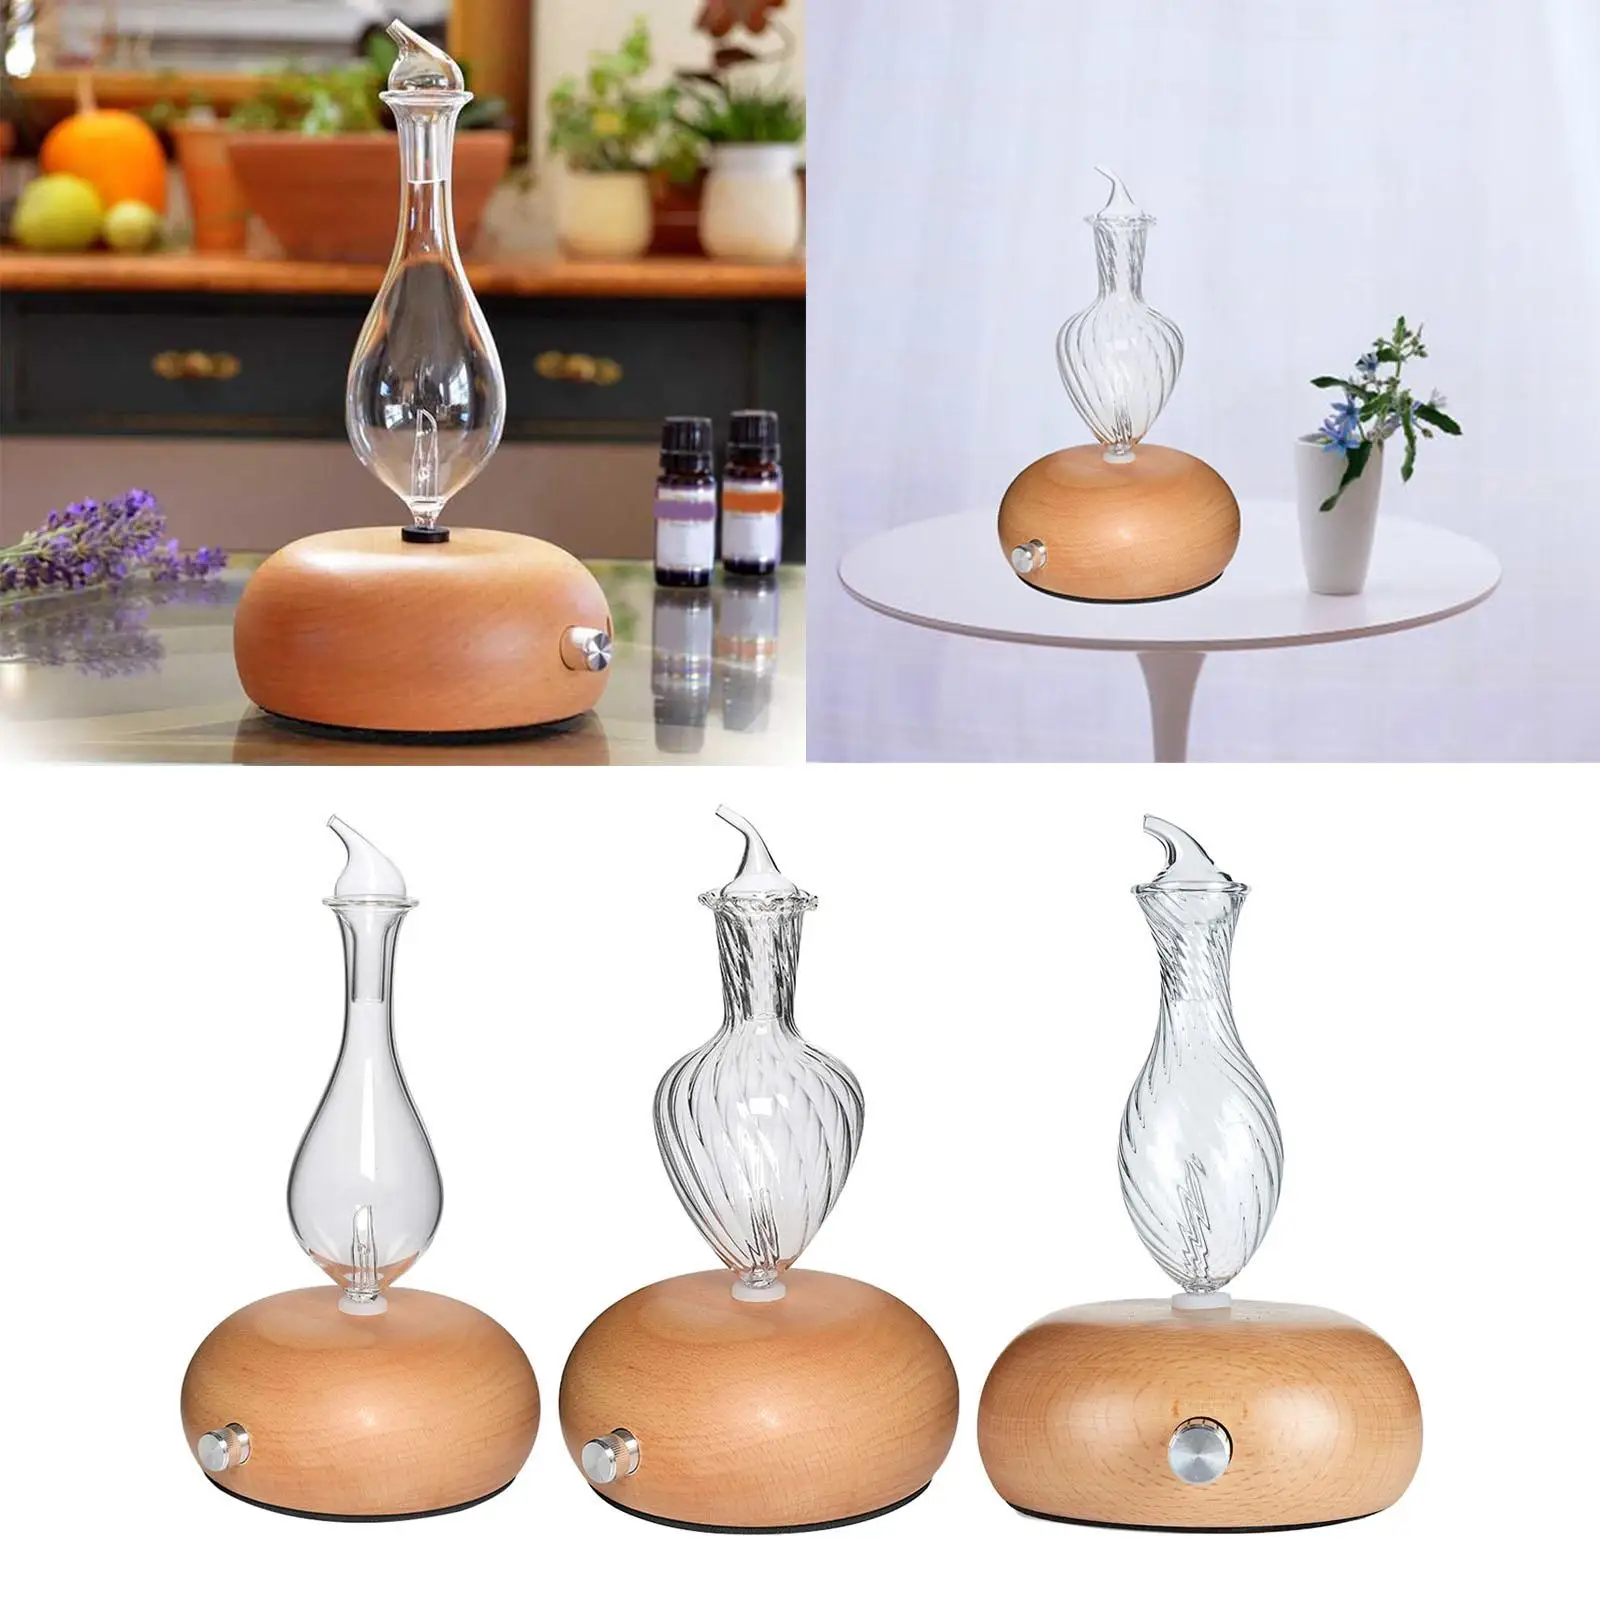 Waterless Nebulizing Essential Oil Diffuser Cool Mist Aroma Air Humidifier Vaporizer Night Light for SPA Bedroom